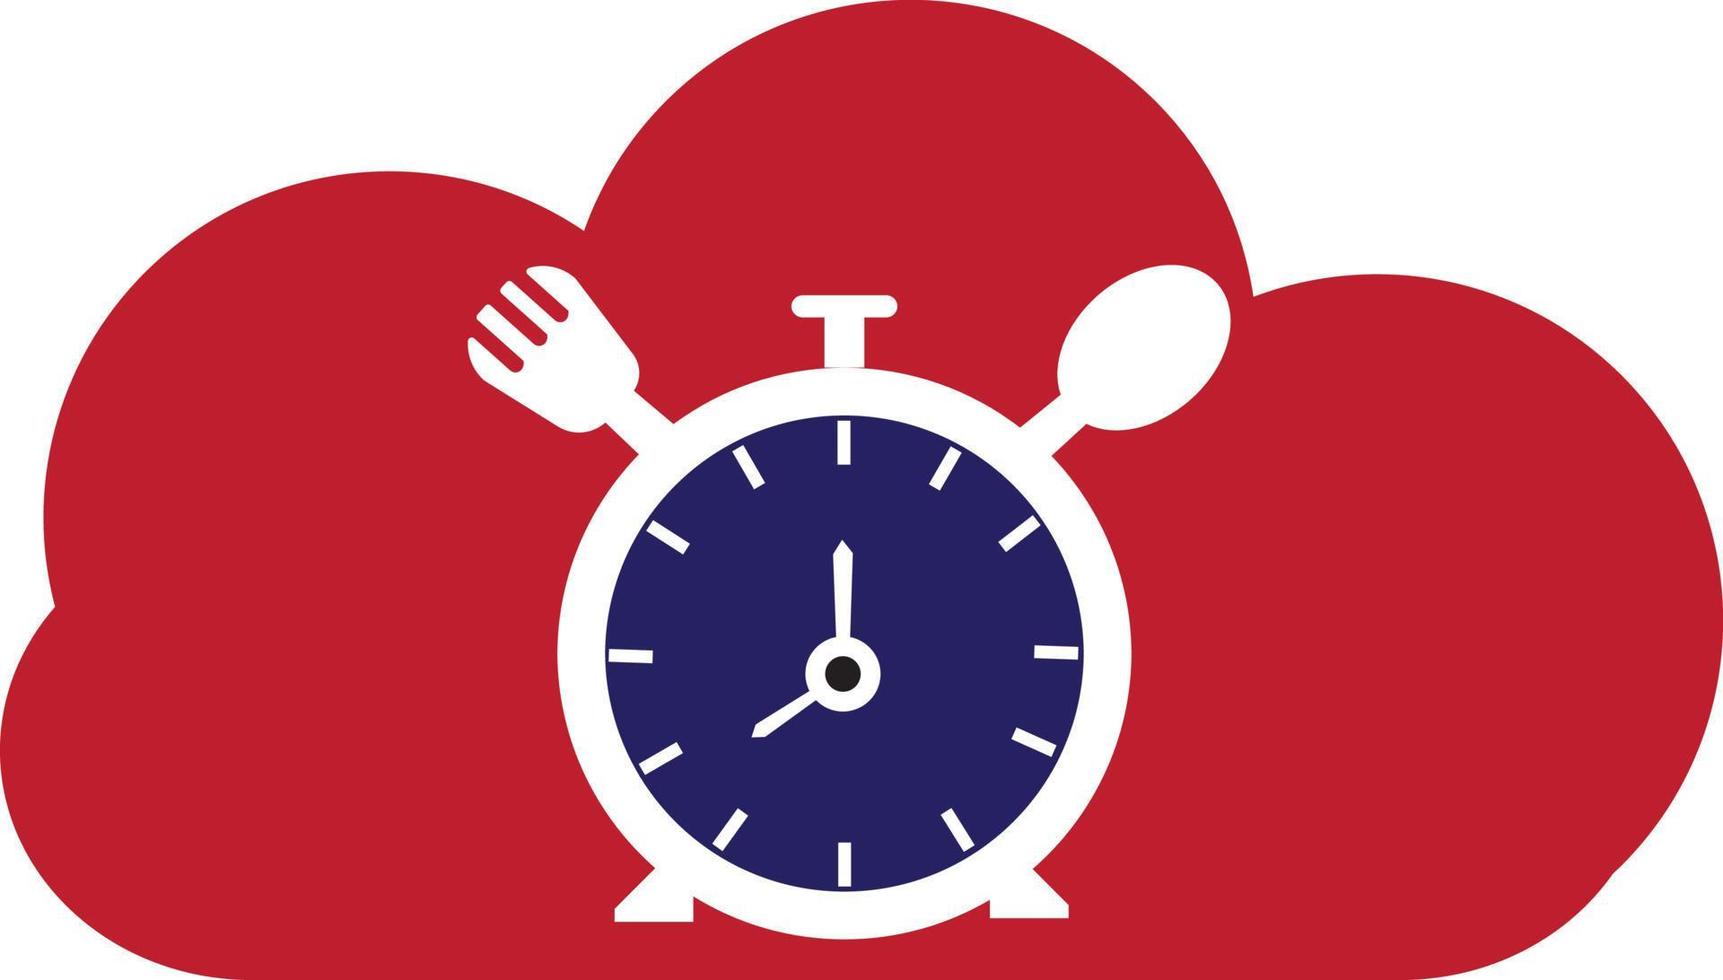 Eat time vector logo template. This logo with clock, spoon and fork symbol. Suitable for home, restaurant, cooking, healthy.